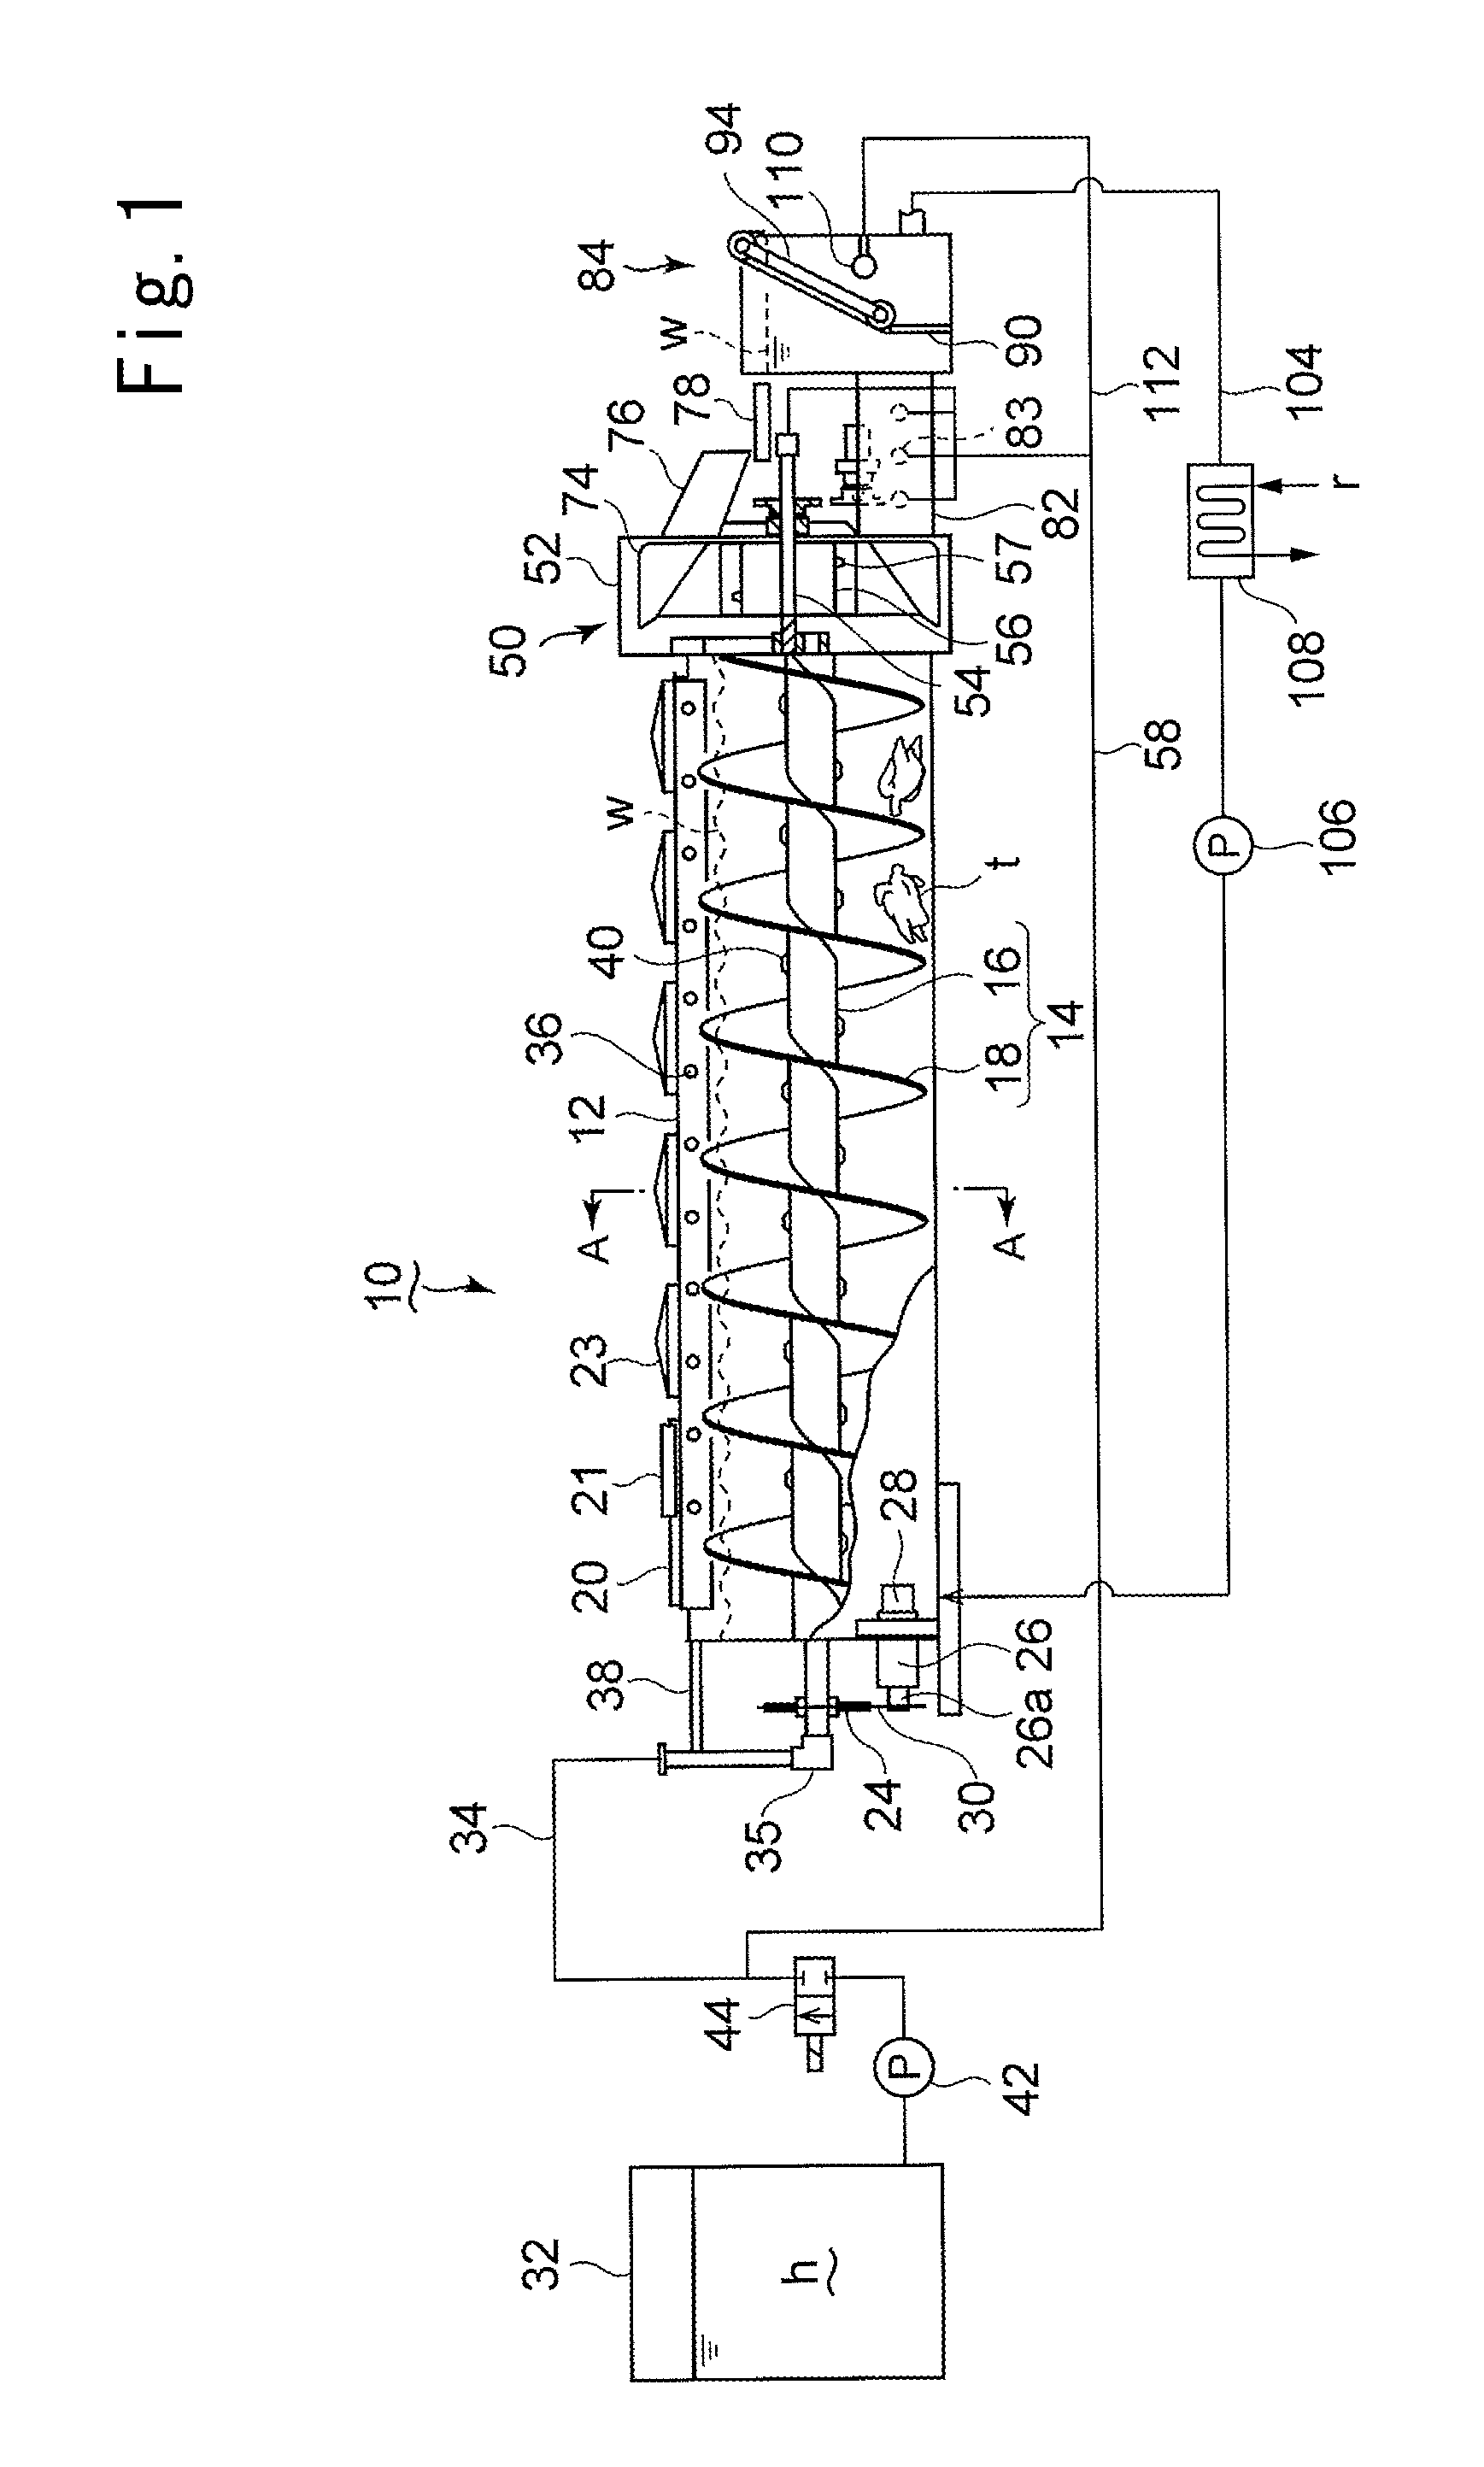 Poultry carcass cooling and conveying system